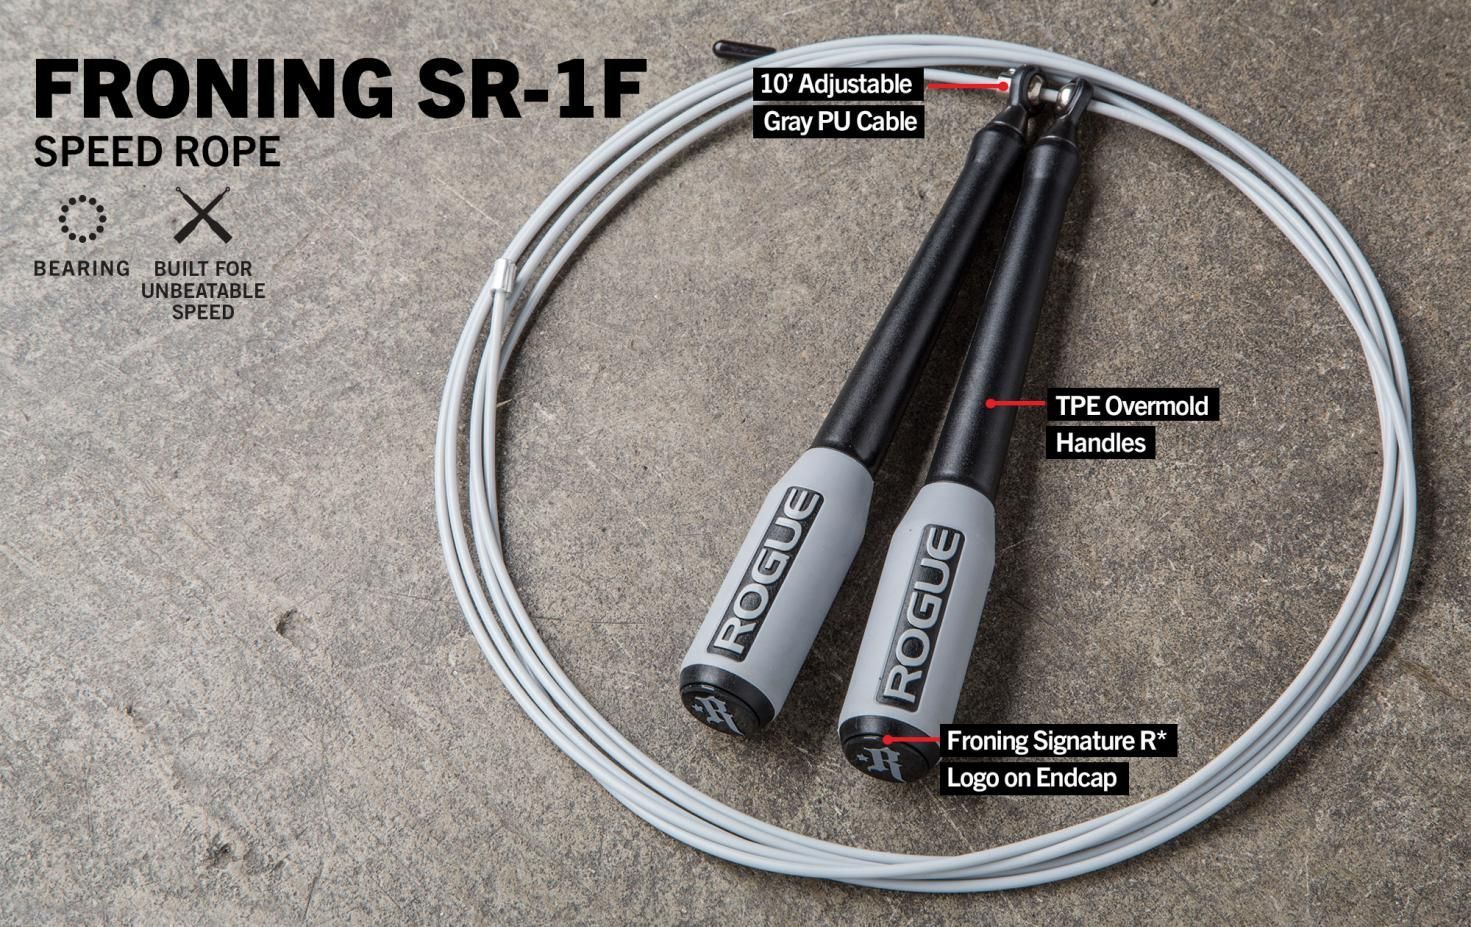 Rogue Fitness SR-1F Froning Speed Rope featuring the Fittest Man on Earth